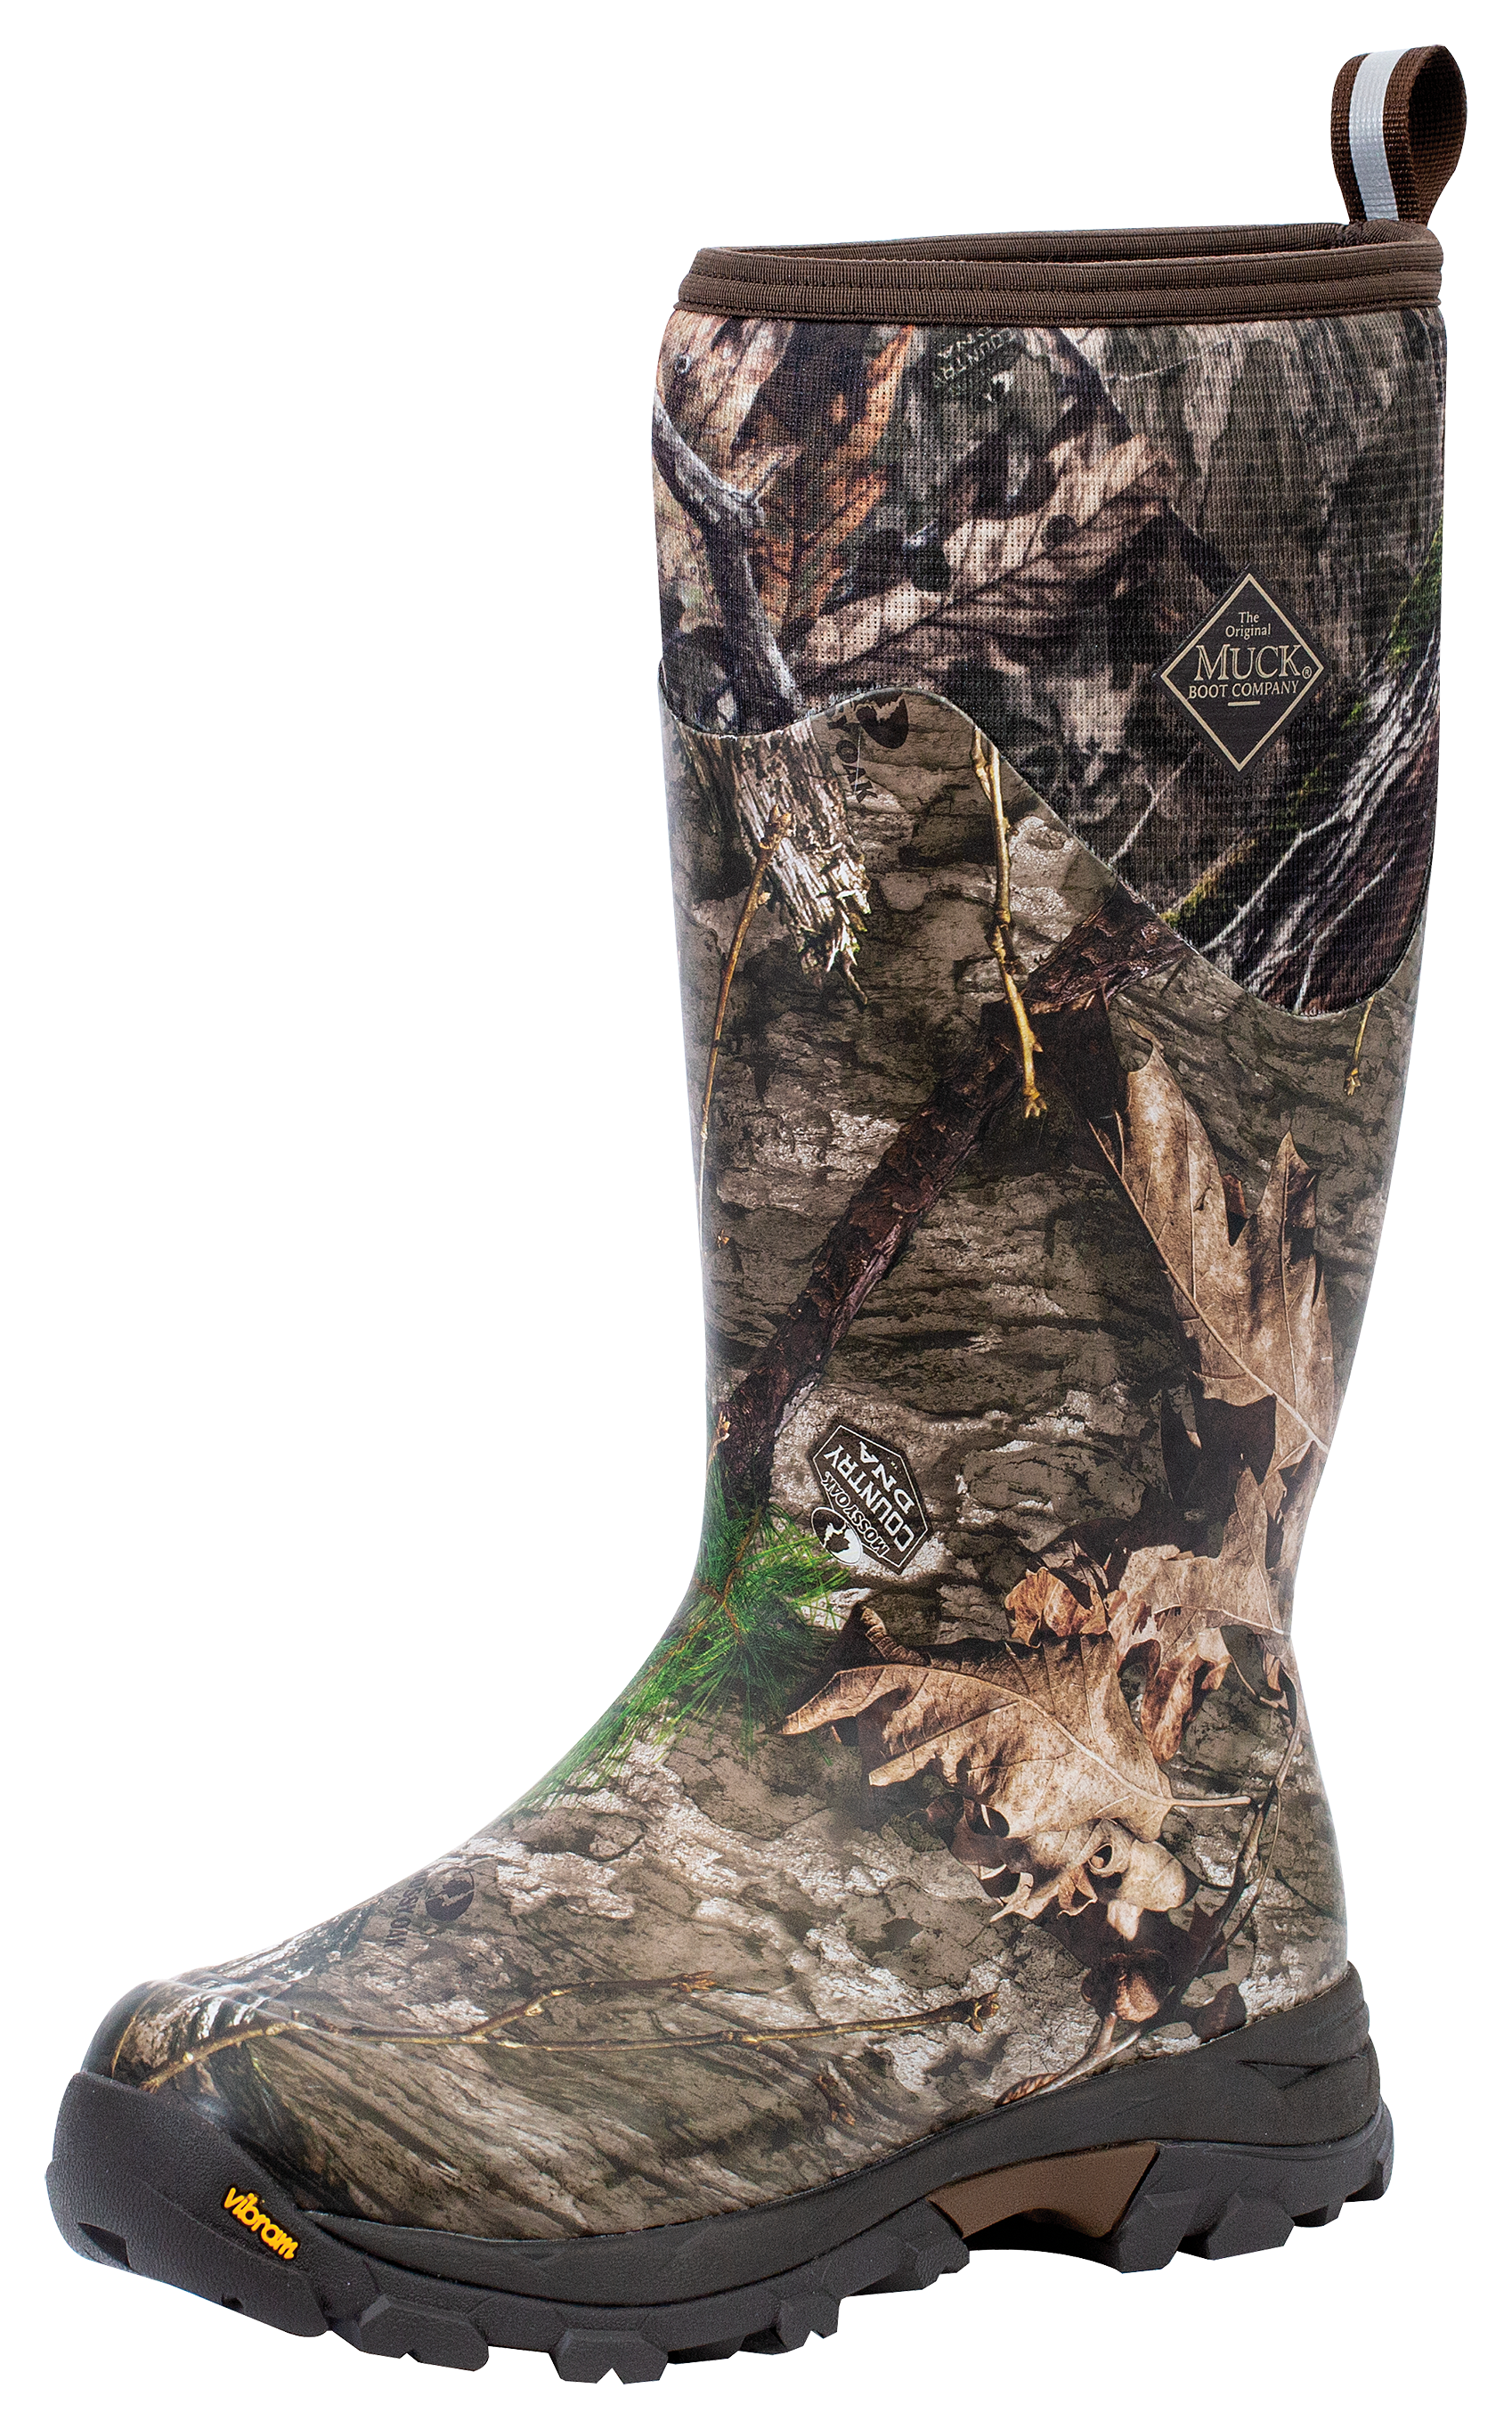 The Original Muck Boot Company Woody Arctic Ice Arctic Grip A.T. Boots for Men - Mossy Oak Country DNA - 13M